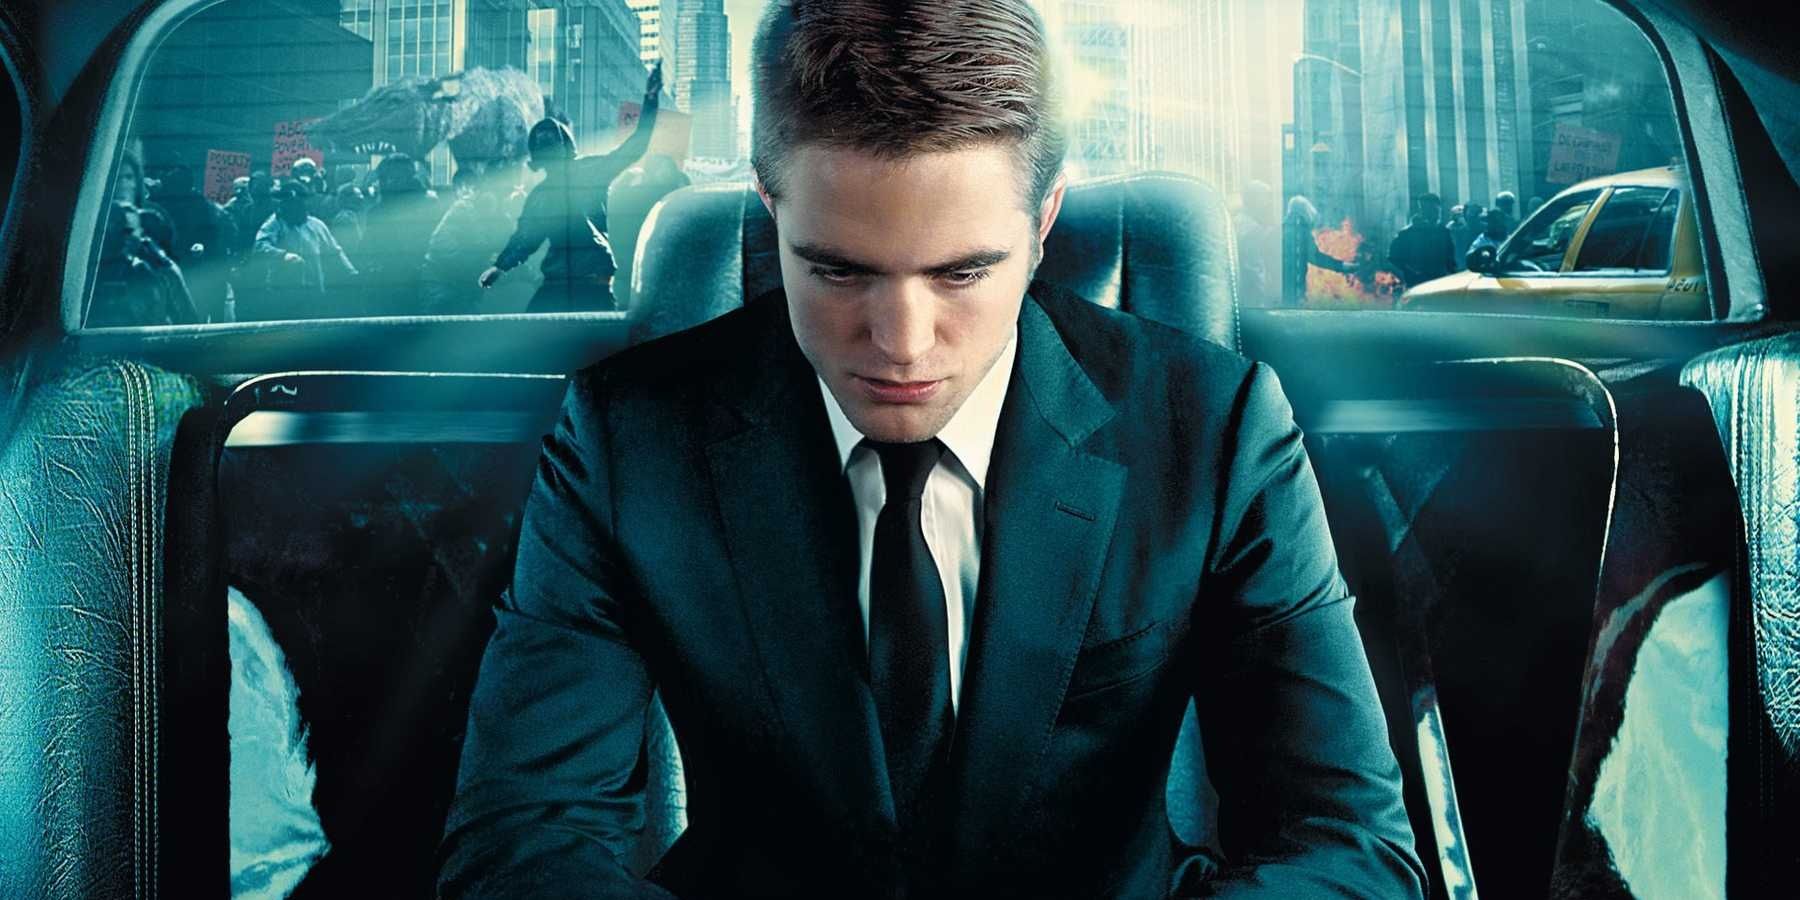 Robert Pattinson in a poster for Cosmopolis